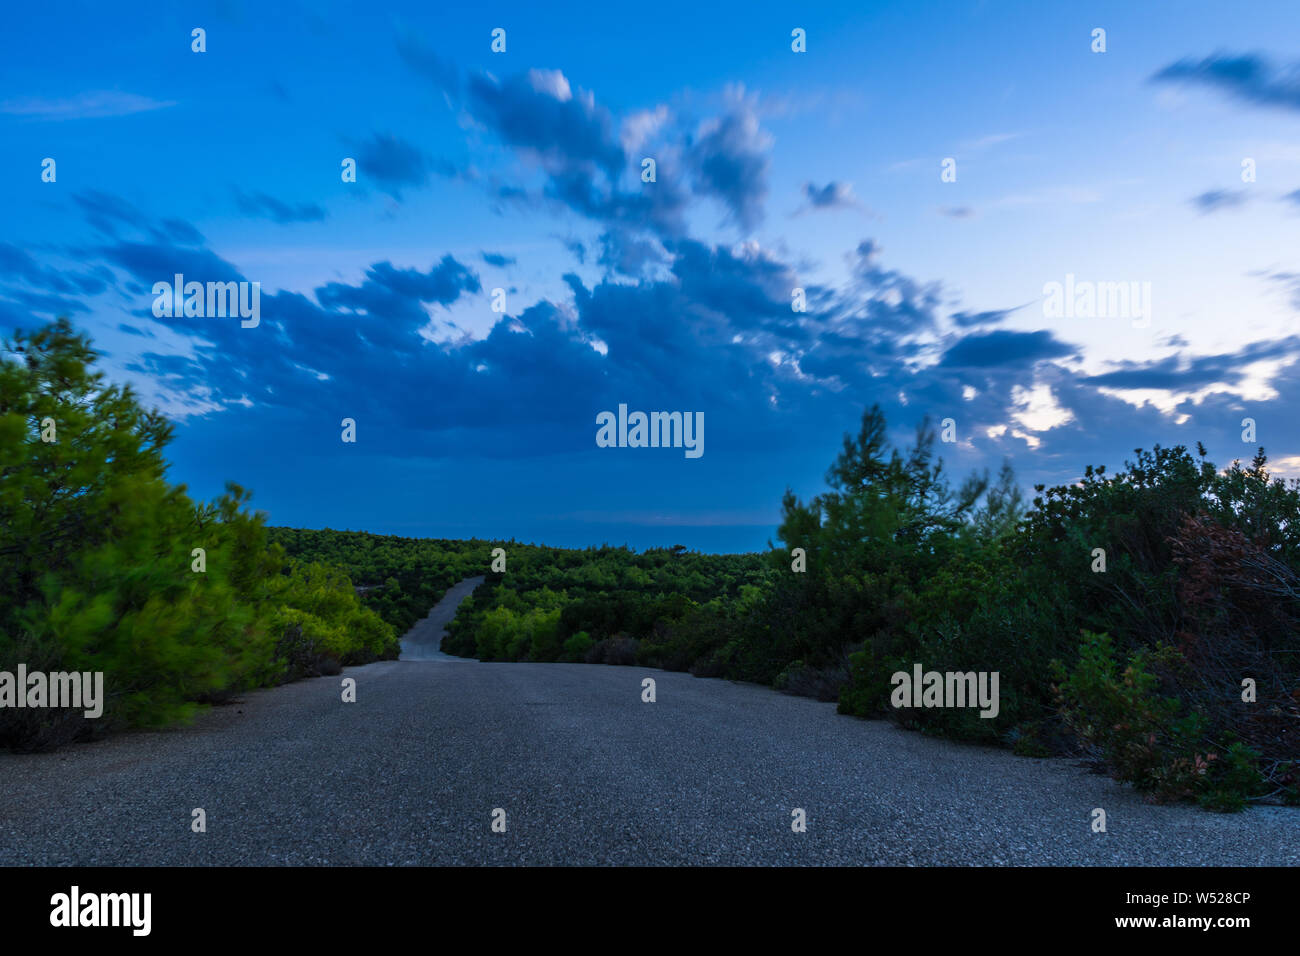 Greece, Zakynthos, Dreamy curved road through green paradise in blue hour mood Stock Photo